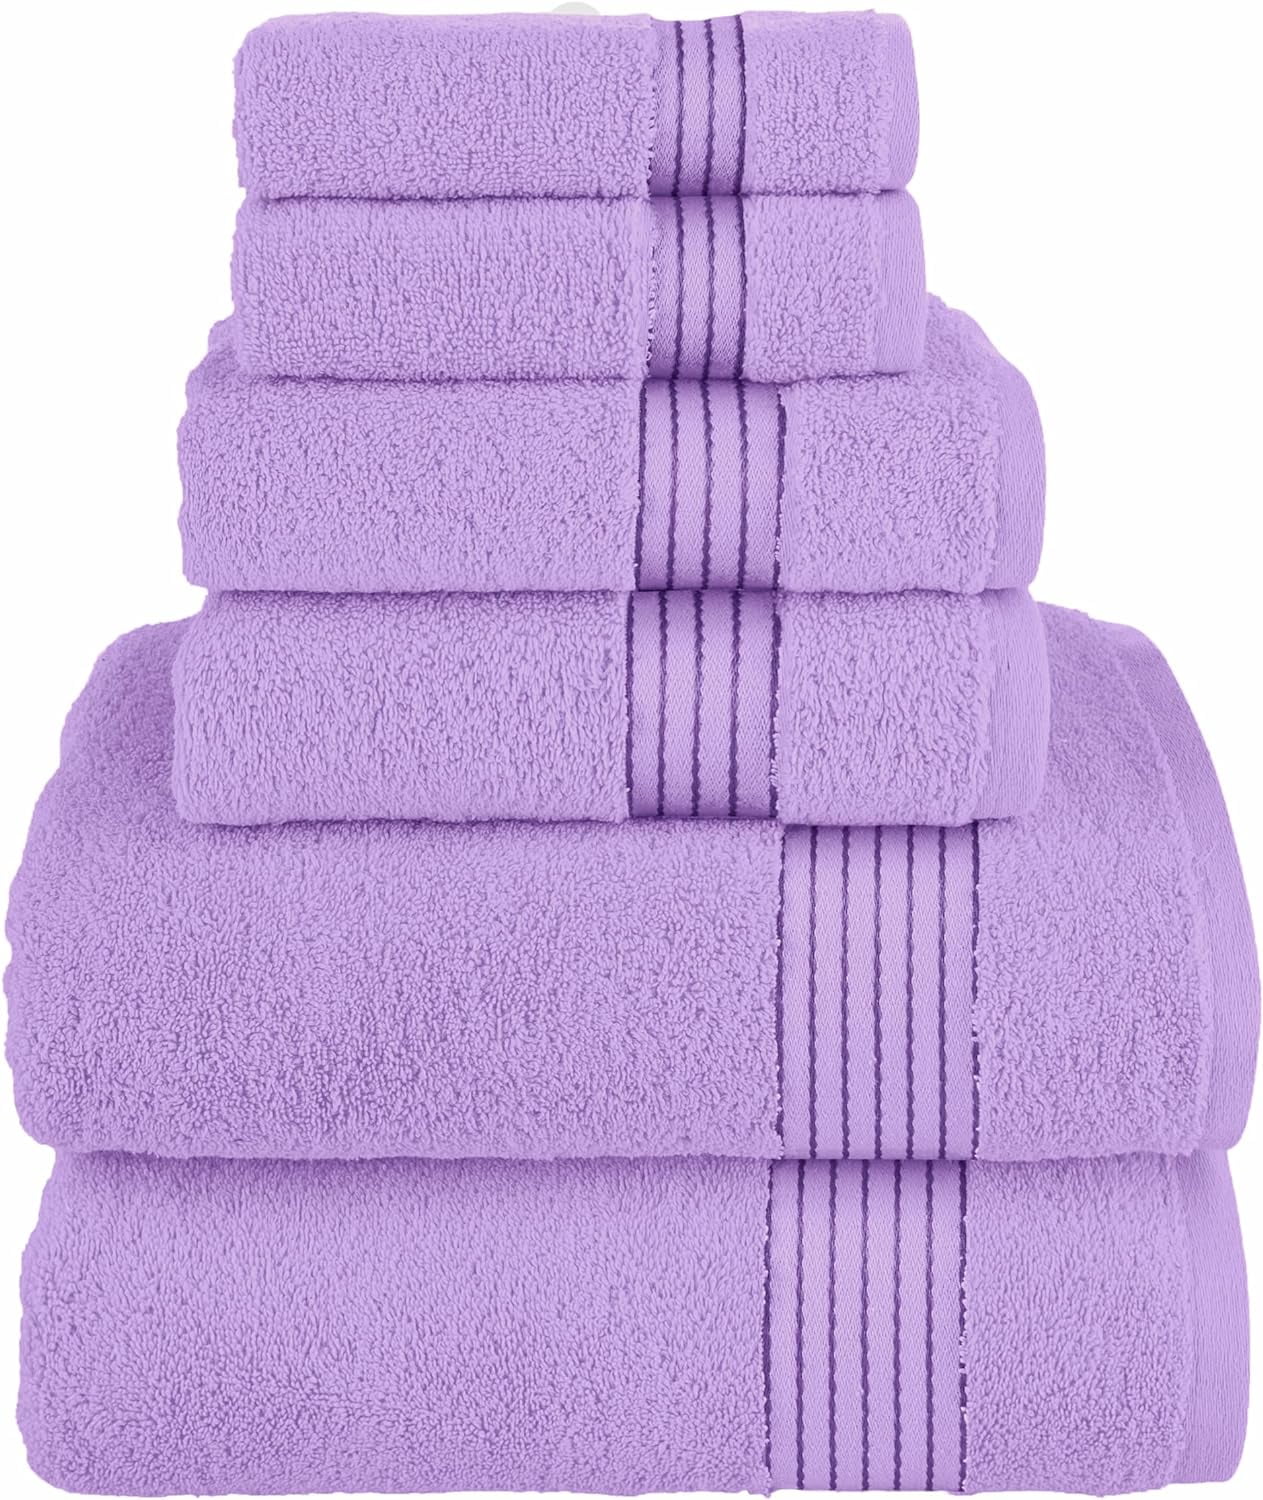 Combed Cotton Towel Sets 6 Pieces Pure Color 2 Large Bath Towels, 2 Hand  Towels, 2 Washcloths Absorbent Home Hotel Bathroom Set - AliExpress